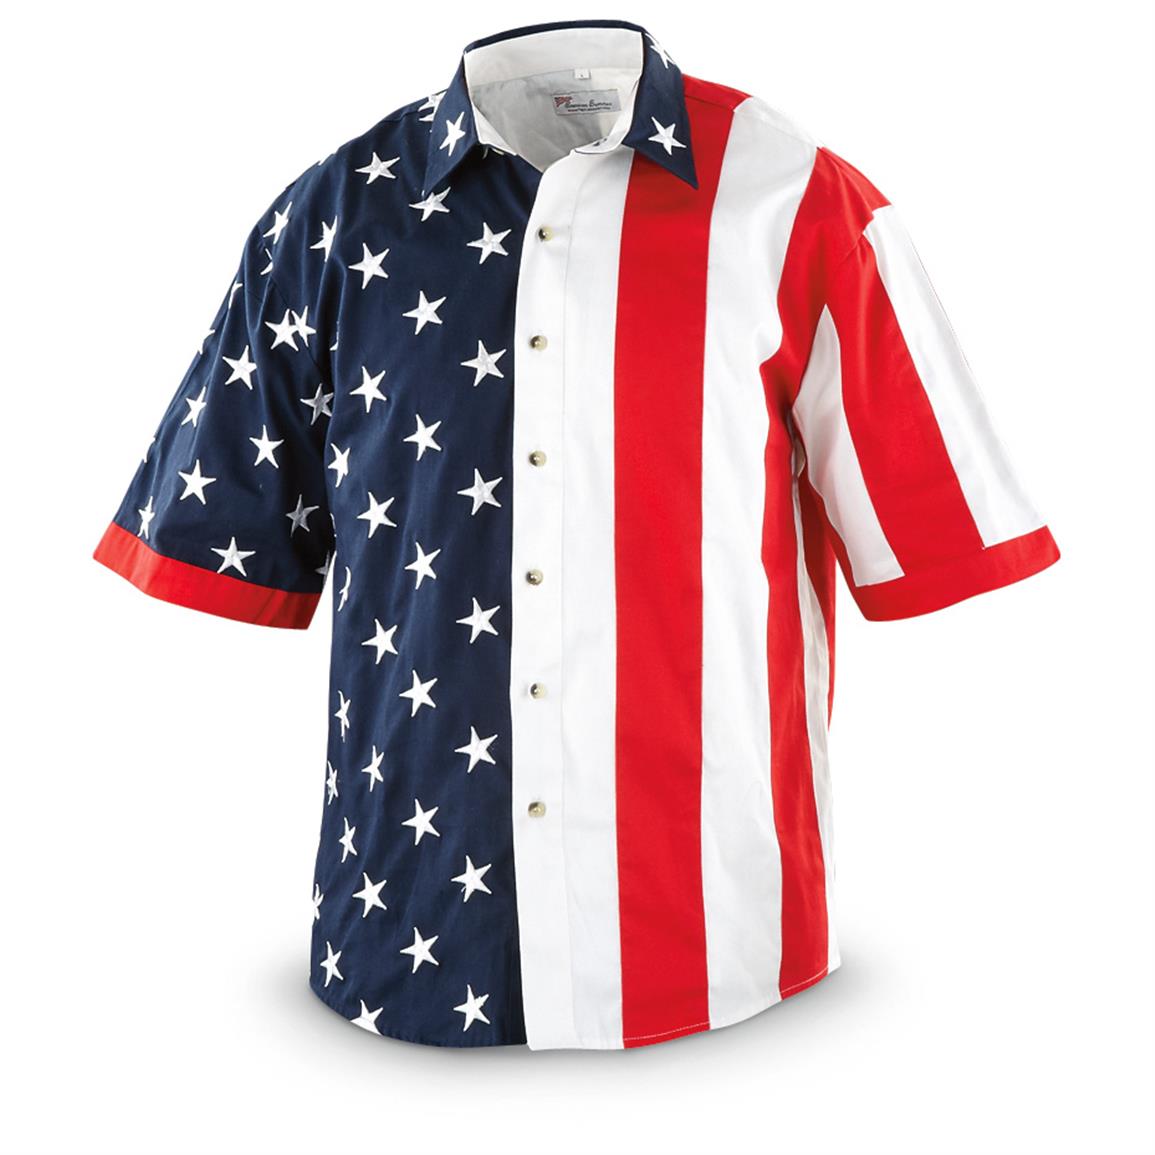 Short-sleeved Stars and Stripes Shirt - 623656, Shirts at Sportsman's Guide